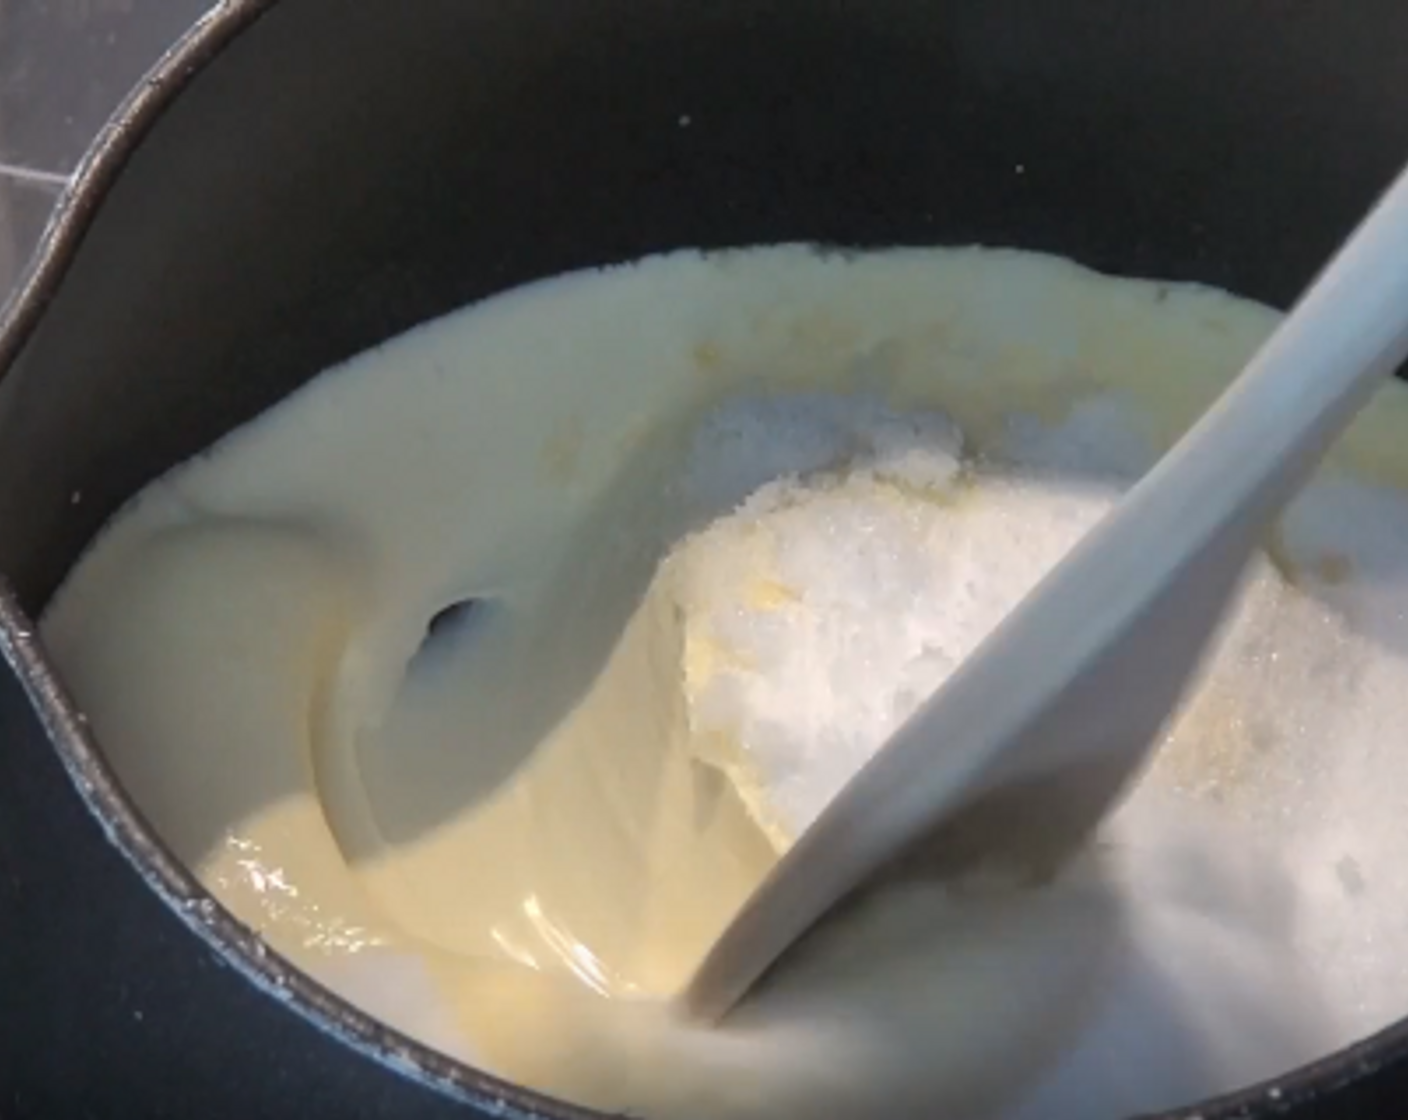 step 1 To a small saucepan, add Heavy Cream (1 1/4 cups) and Caster Sugar (1/3 cup). Over a low heat, stir together until the sugar is dissolved.